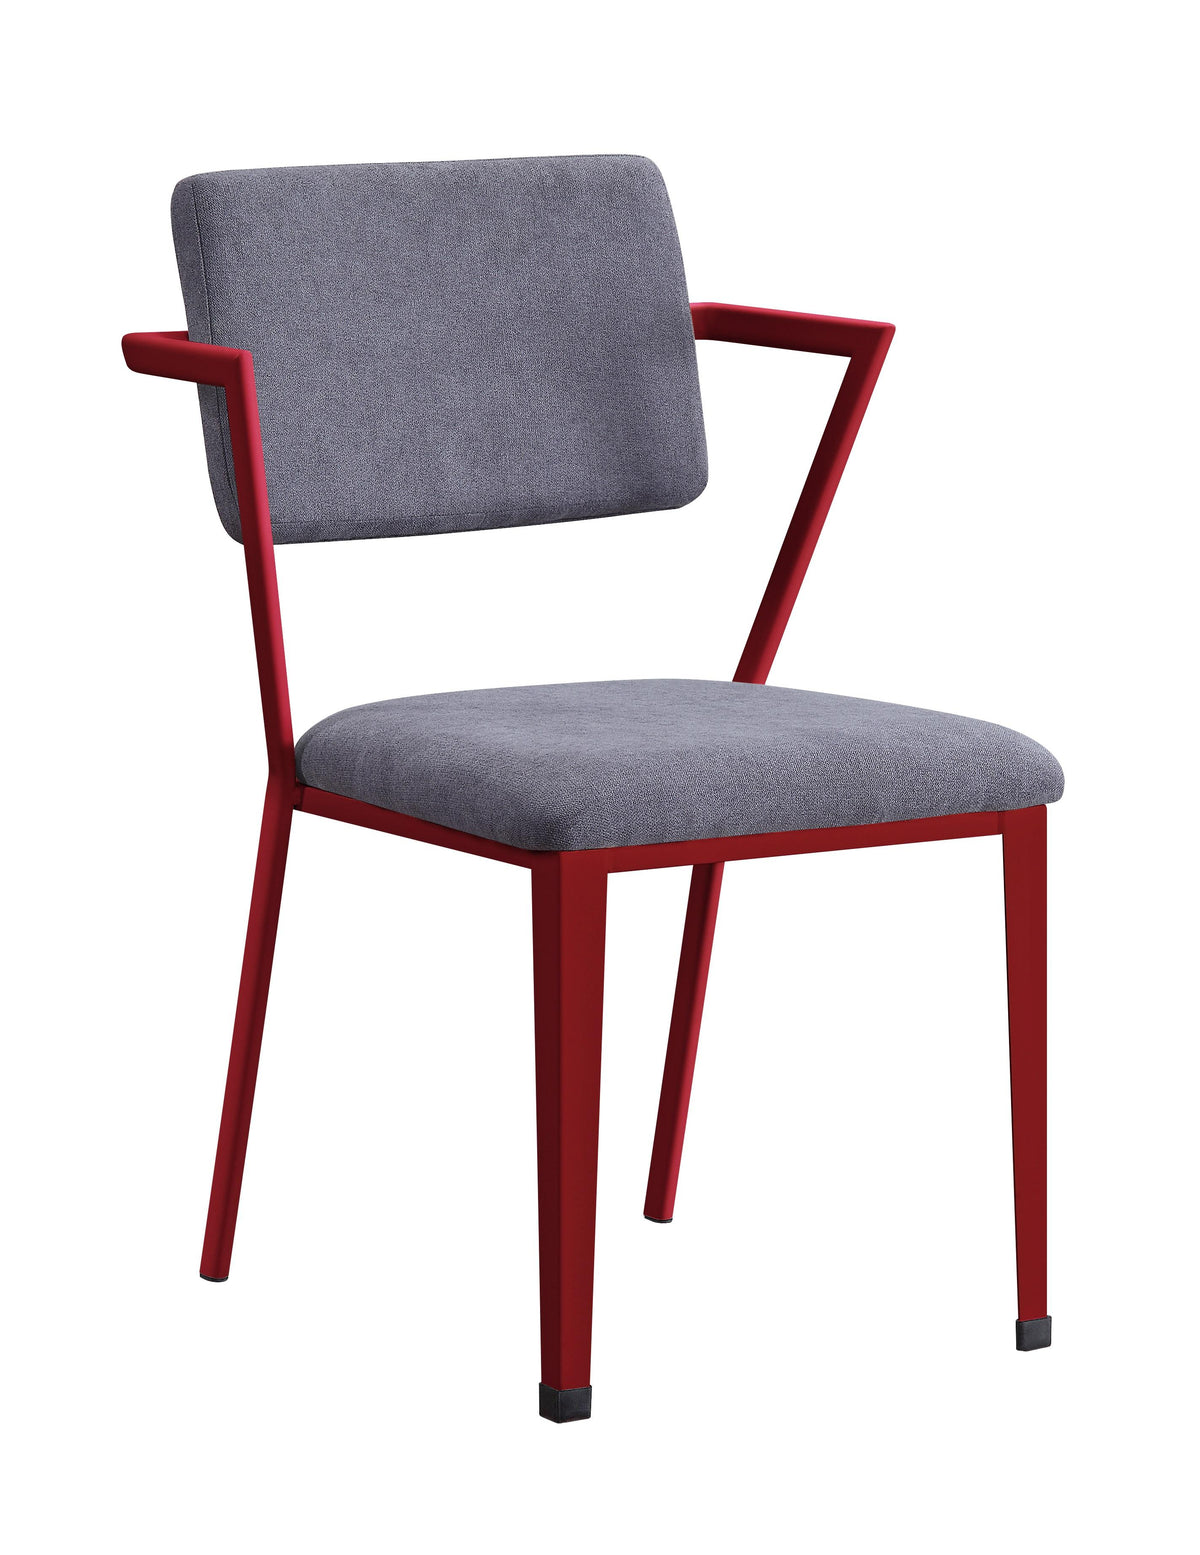 Cargo Gray Fabric & Red Chair  Half Price Furniture